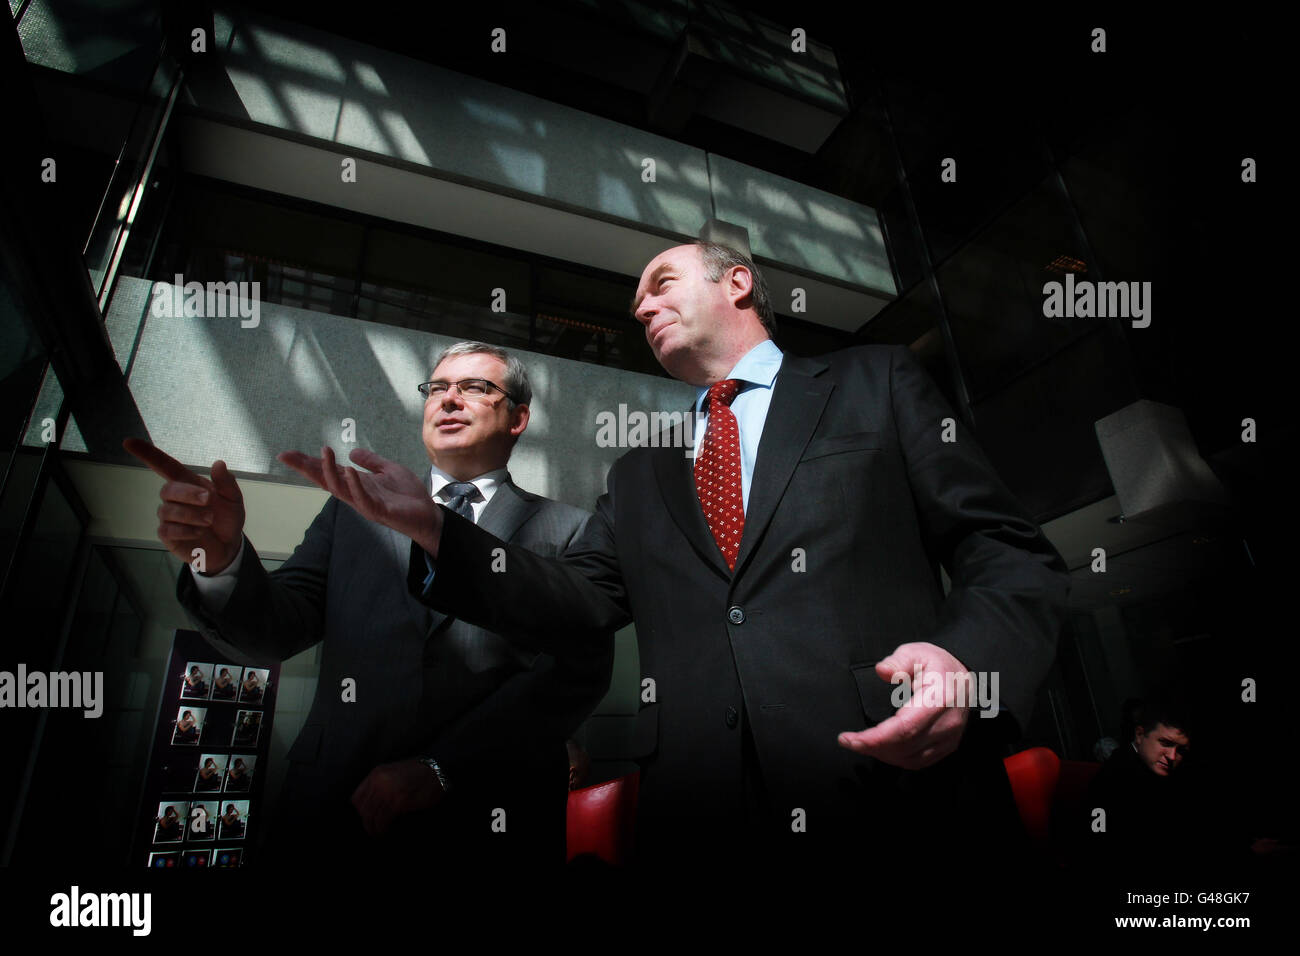 Chief Financial Officer Bernard Byrne (left) and Executive Chairman David Hodgkinson of Allied Irish Banks (AIB) at AIB Bankcentre in Ballsbridge, Dublin, as the bank announced it expects to axe more than 2,000 jobs by the end of next year. Stock Photo